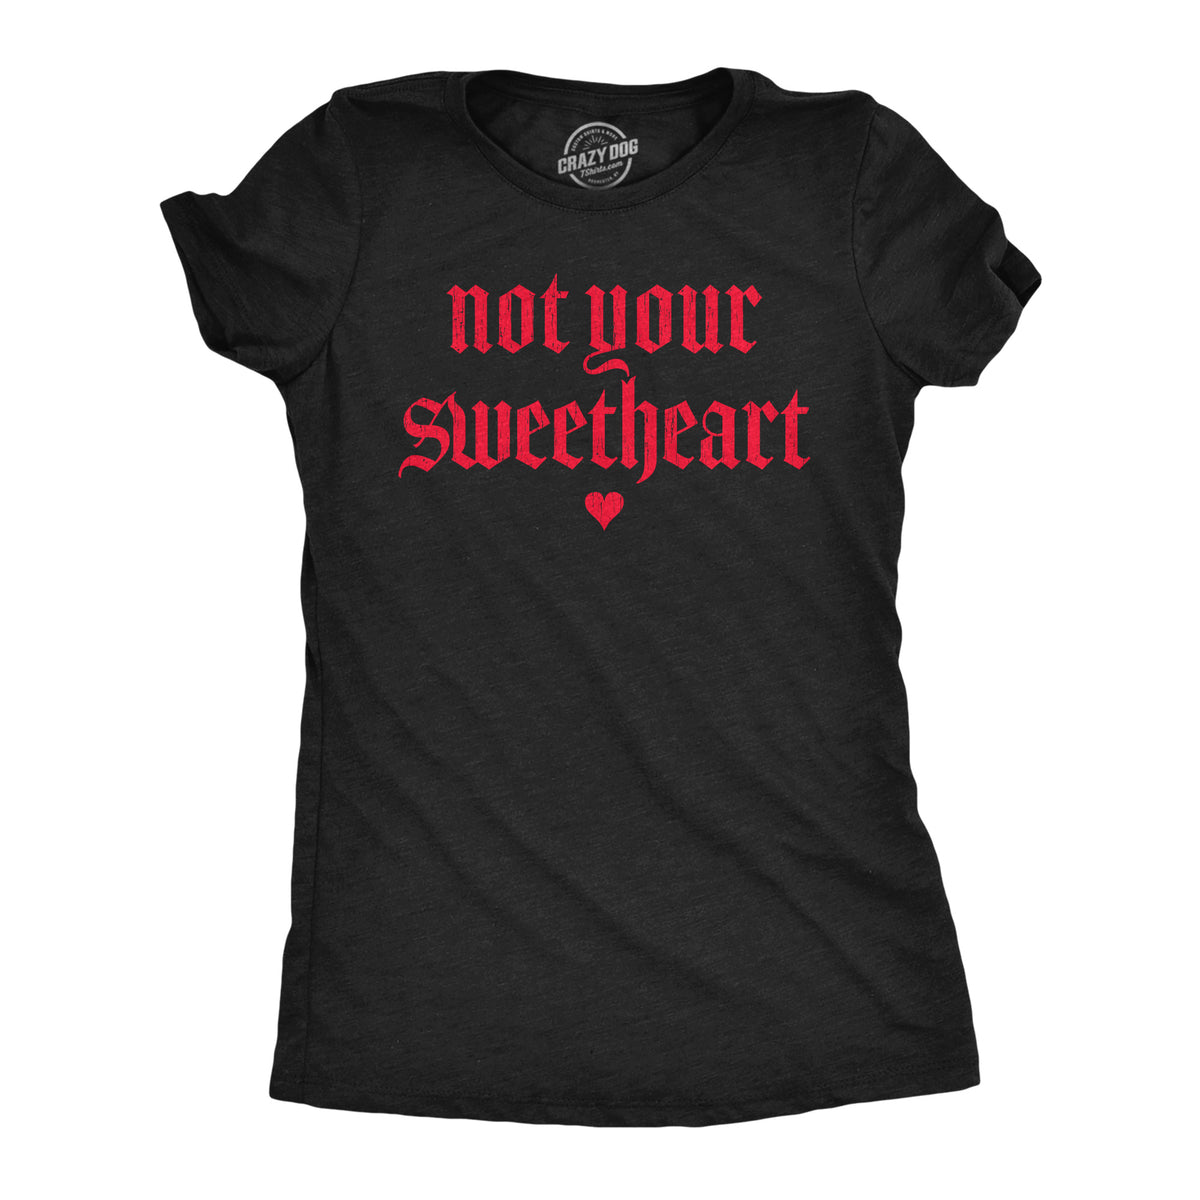 Funny Heather Black - Not Your Sweetheart Not Your Sweatheart Womens T Shirt Nerdy Valentine&#39;s Day Sarcastic Tee